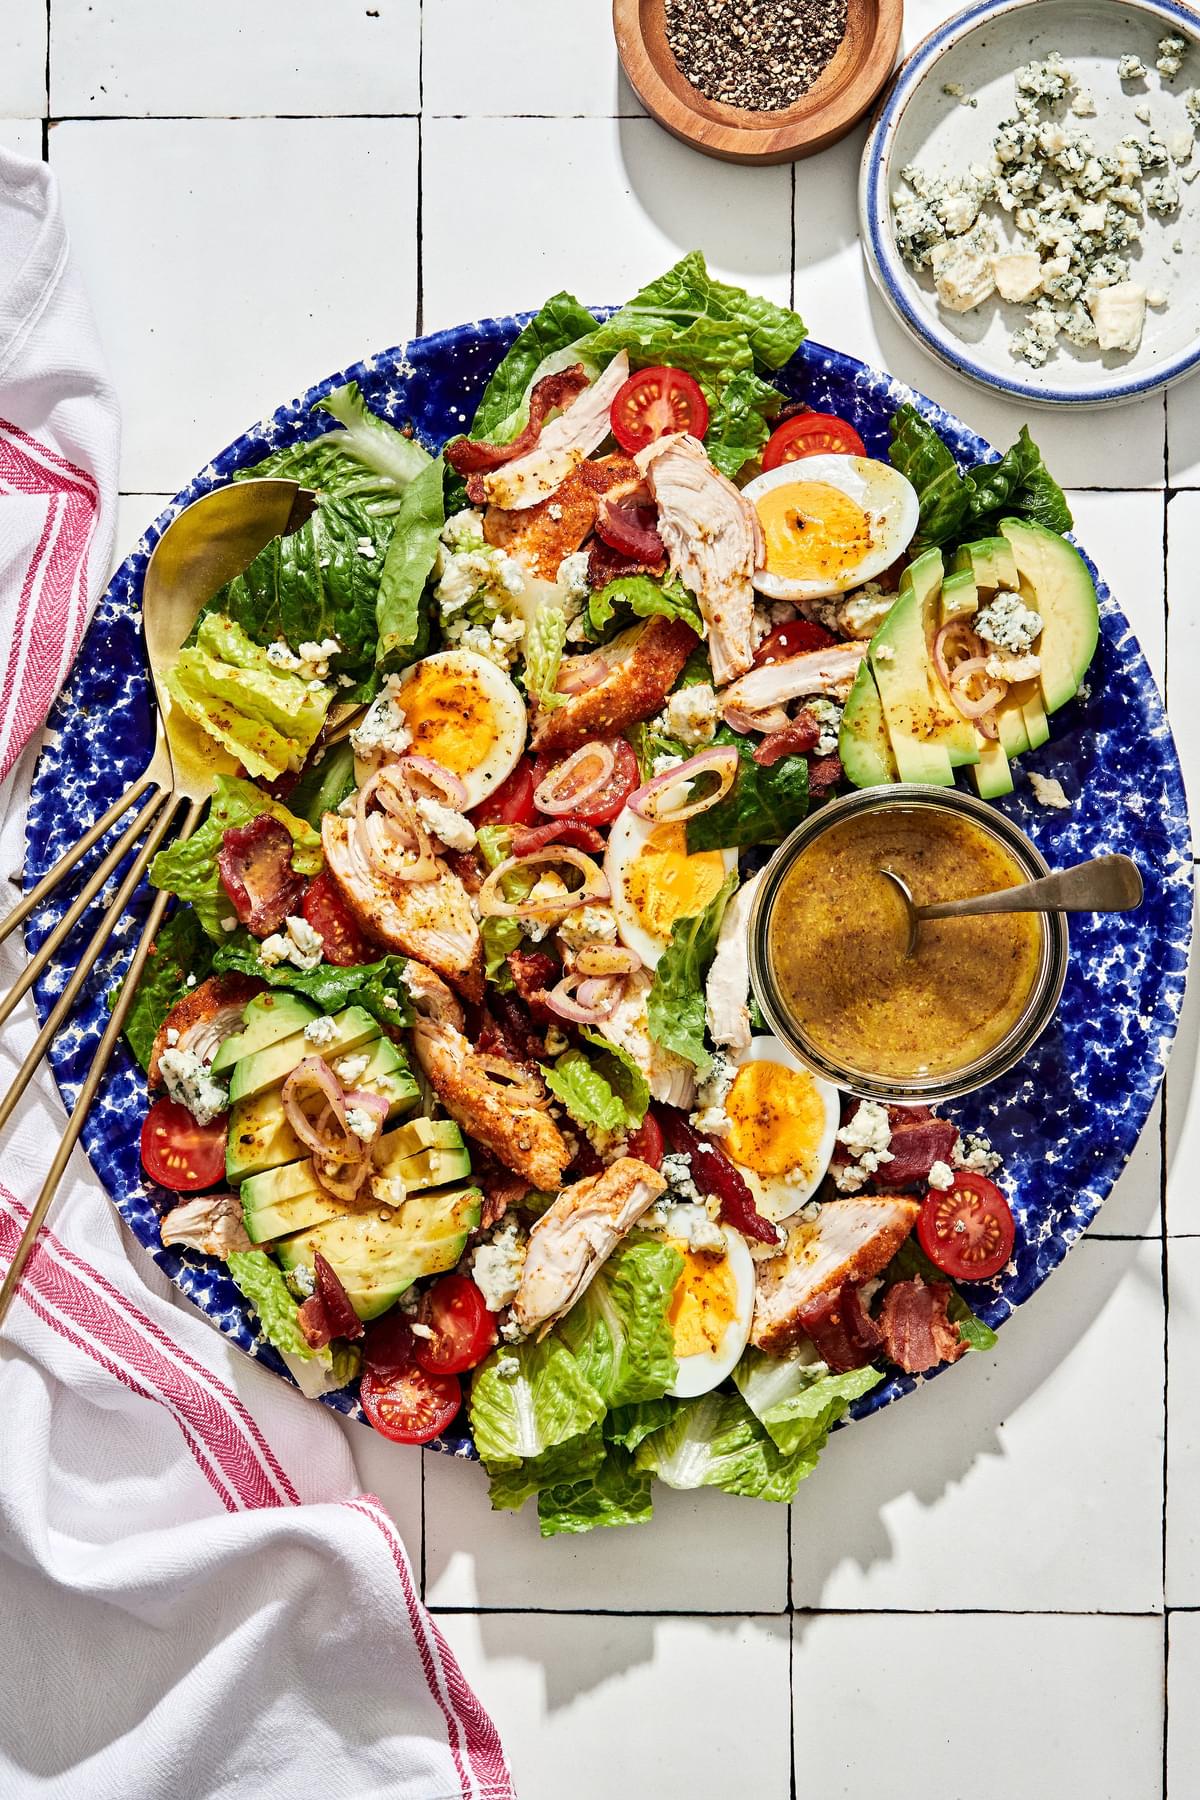 classic cobb salad made with romaine, chicken, hard boiled eggs, bacon, tomatoes, blue cheese, avocado & shallot vinaigrette